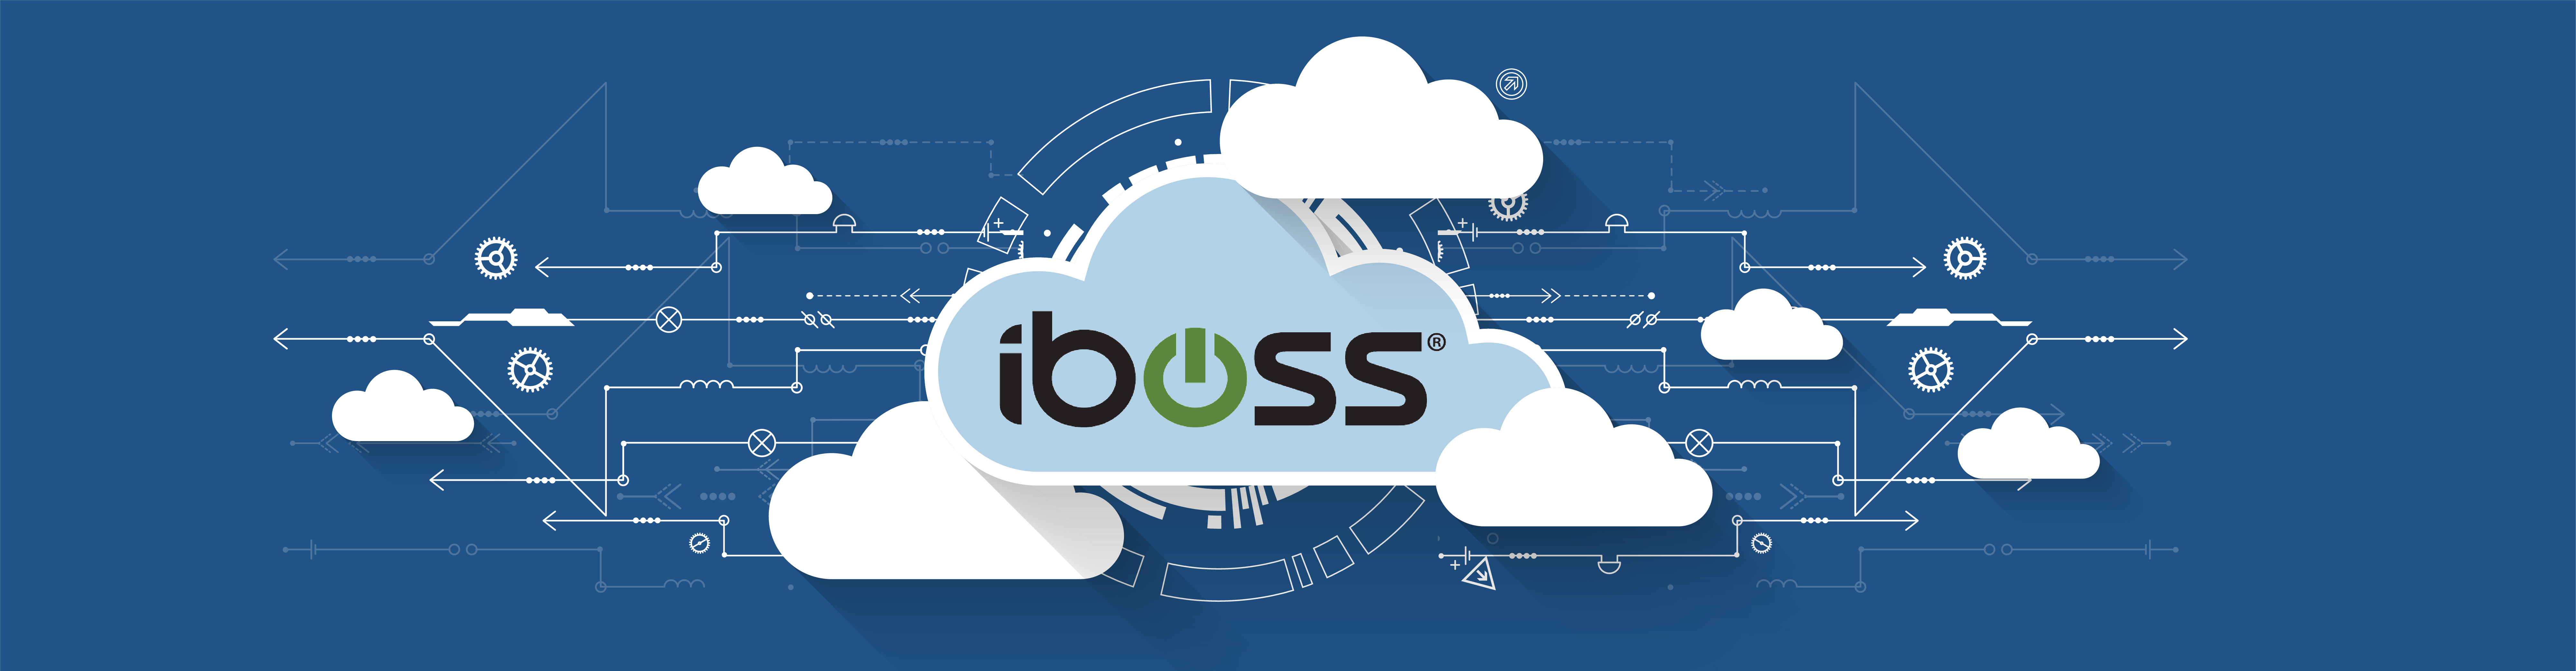 Clouds on blue background, with a cloud that has the iboss logo in the middle.